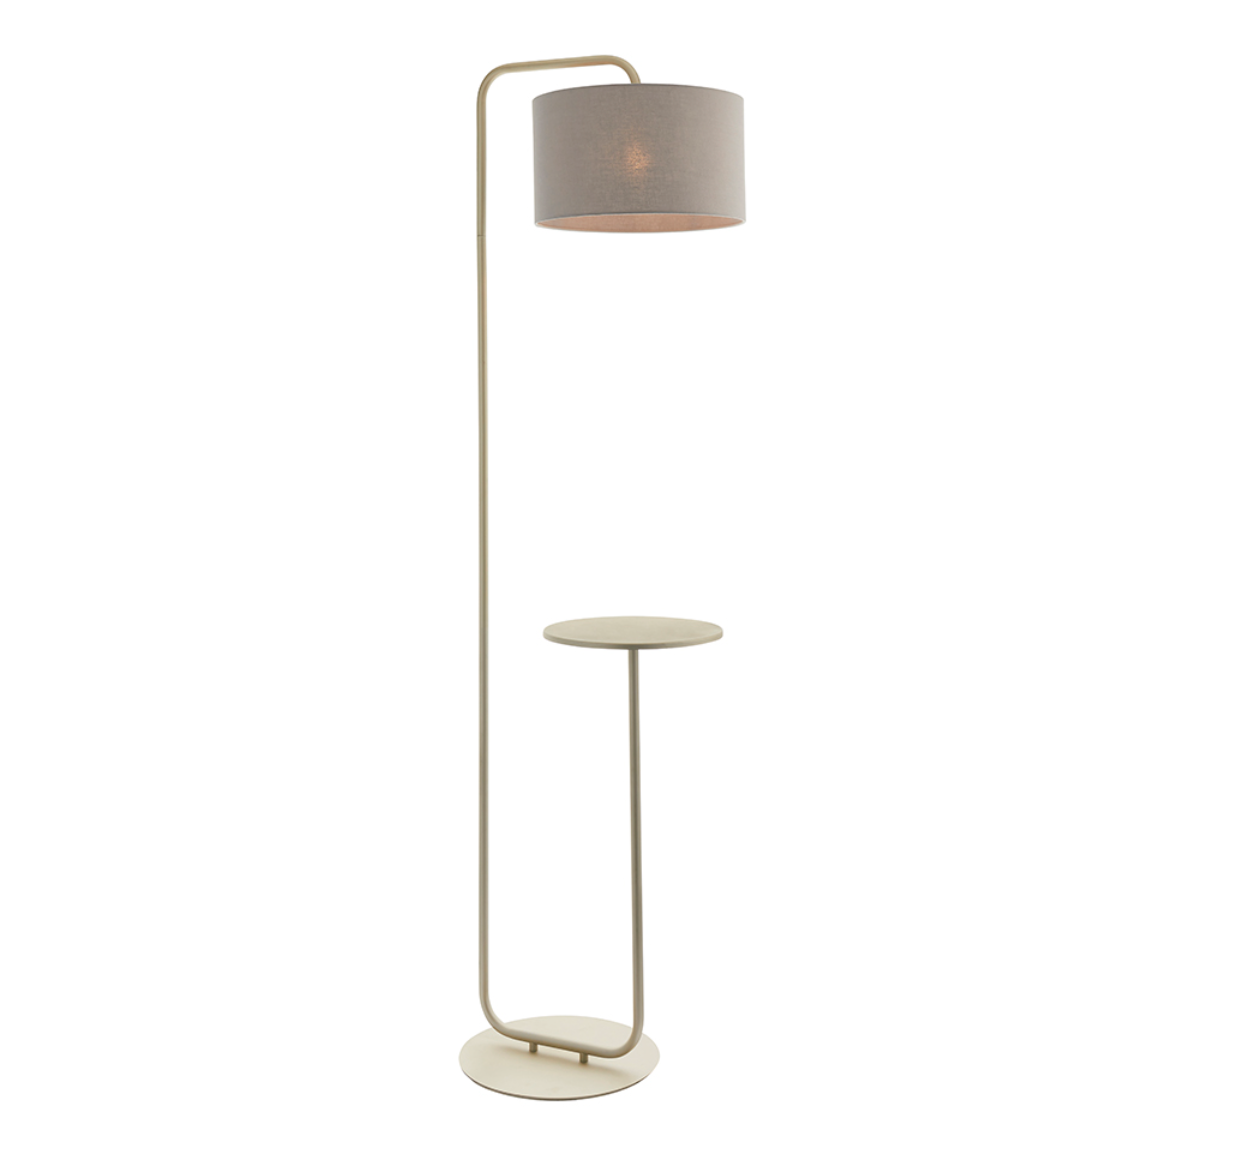 Champagne Painted Floor Light With Table And Grey Shade - ID 11750